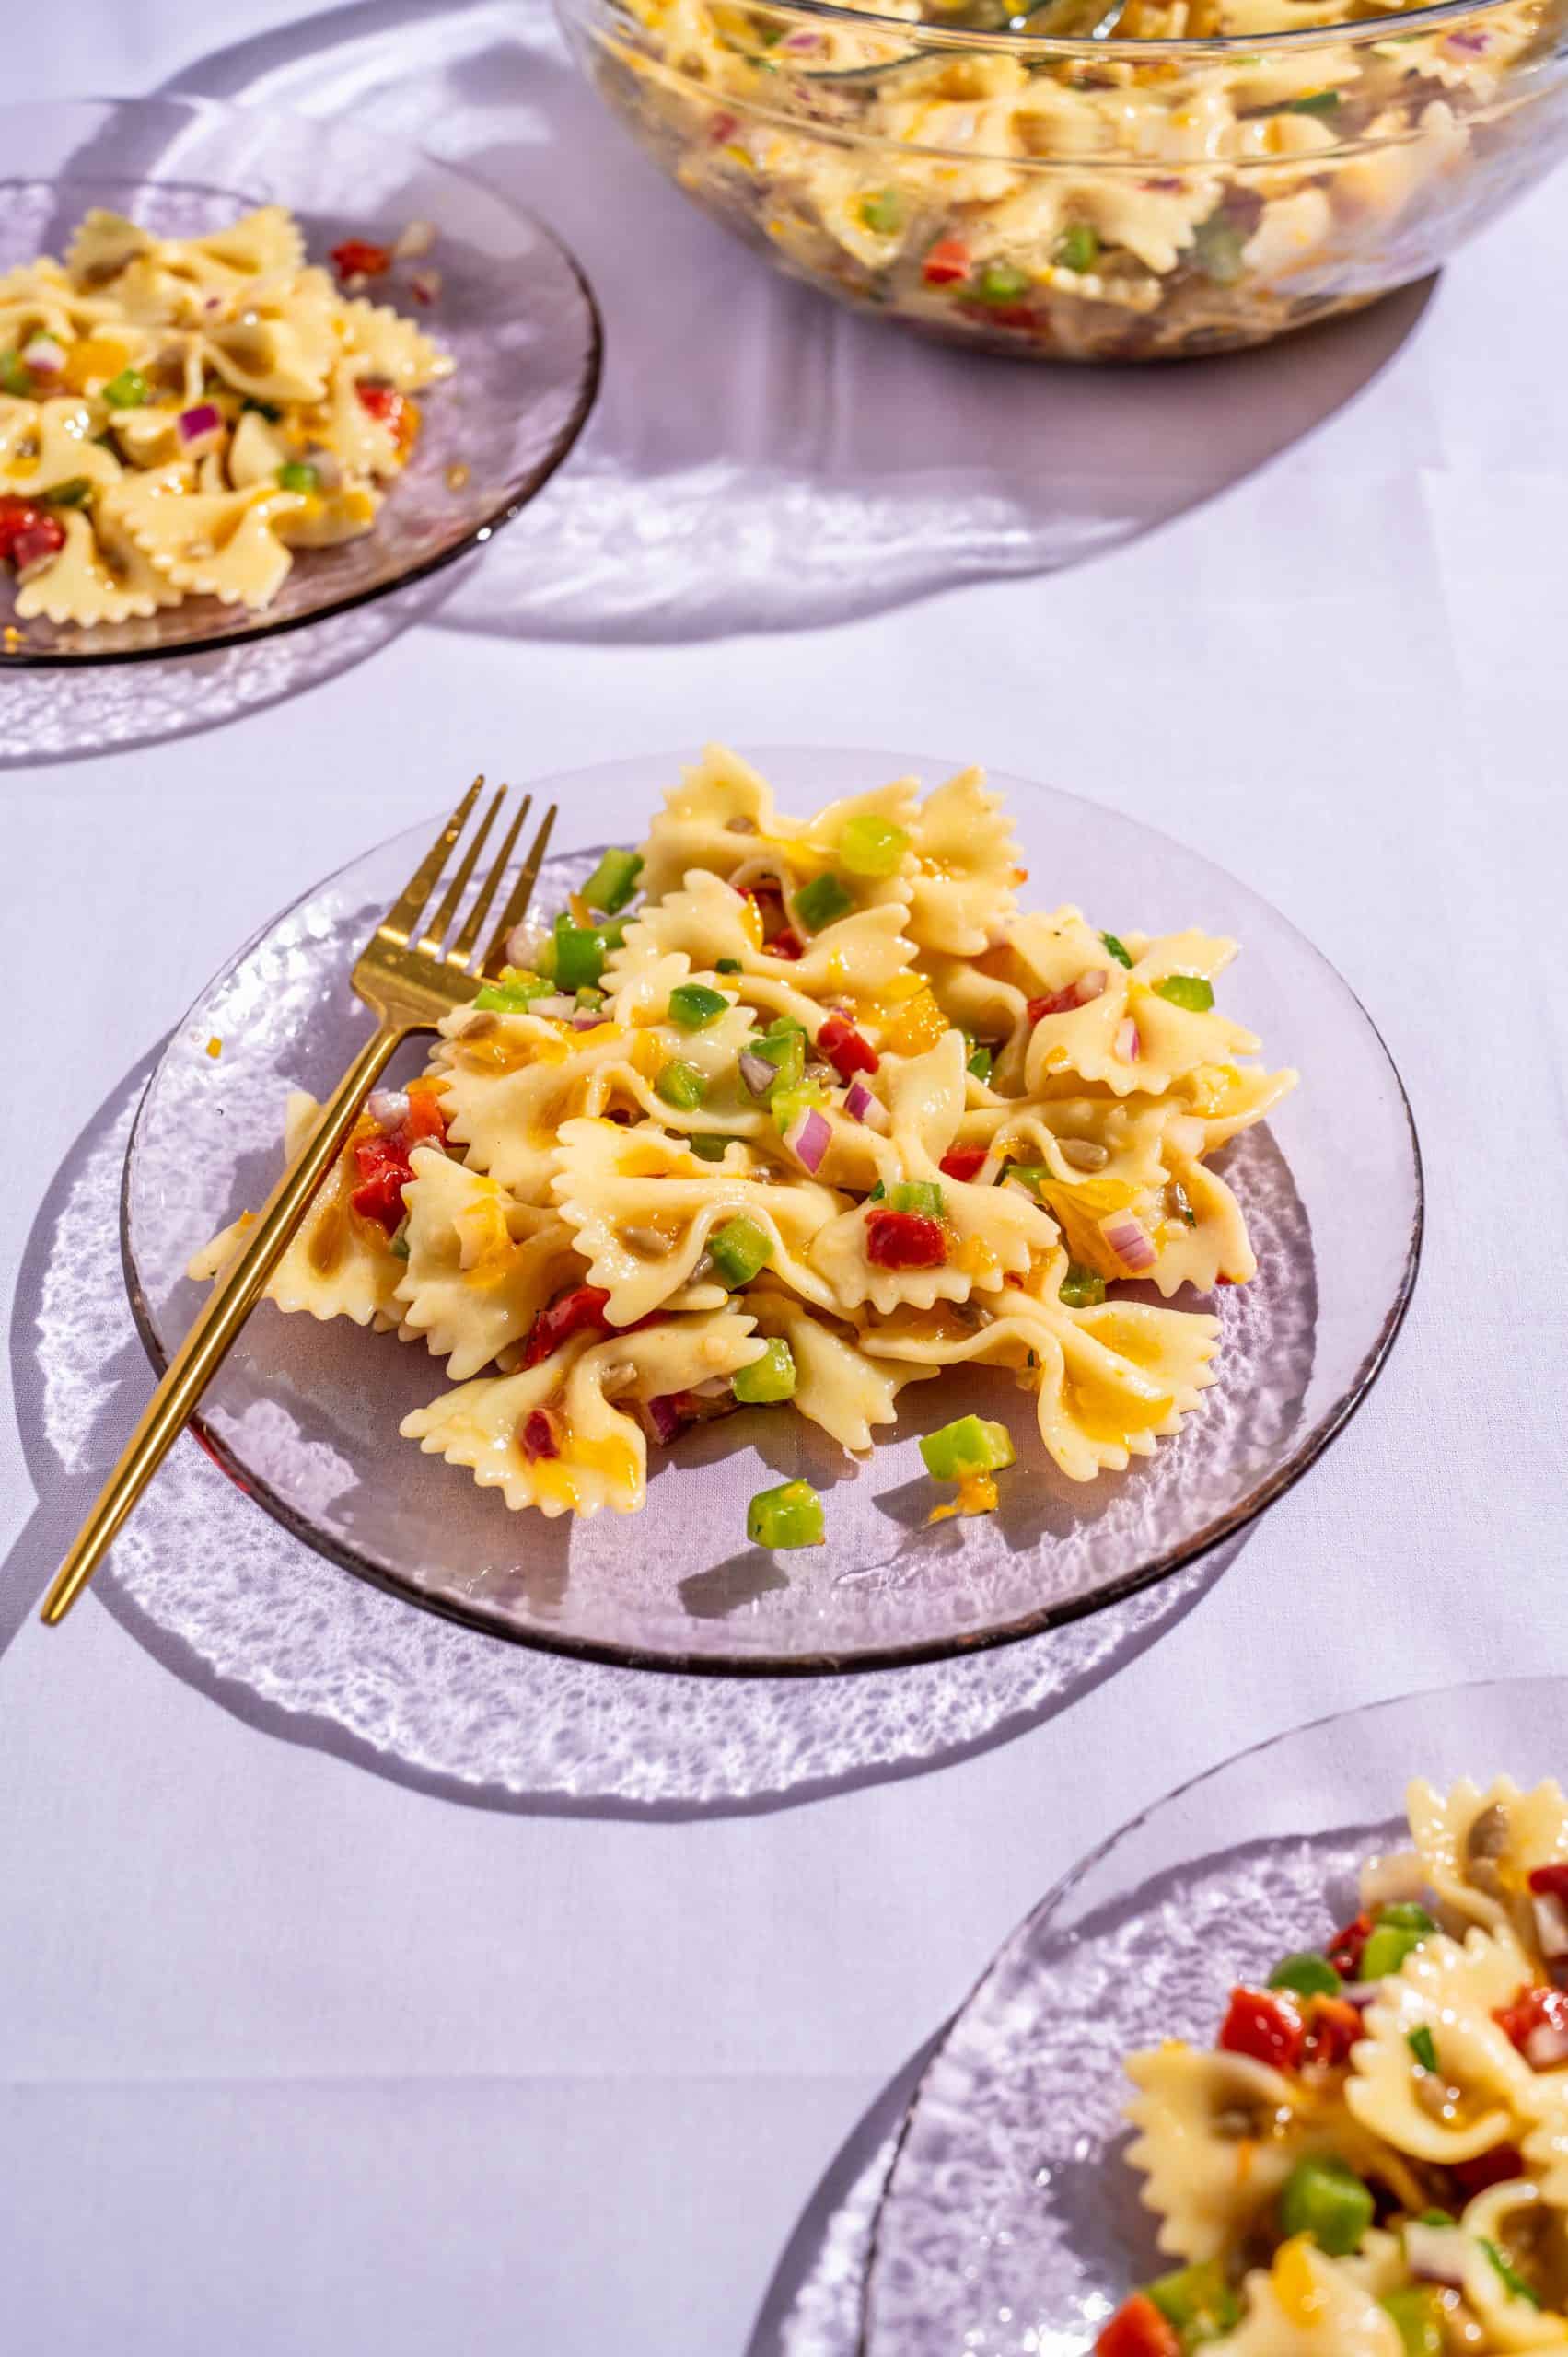 Small serving on honey pasta salad on a glass plate